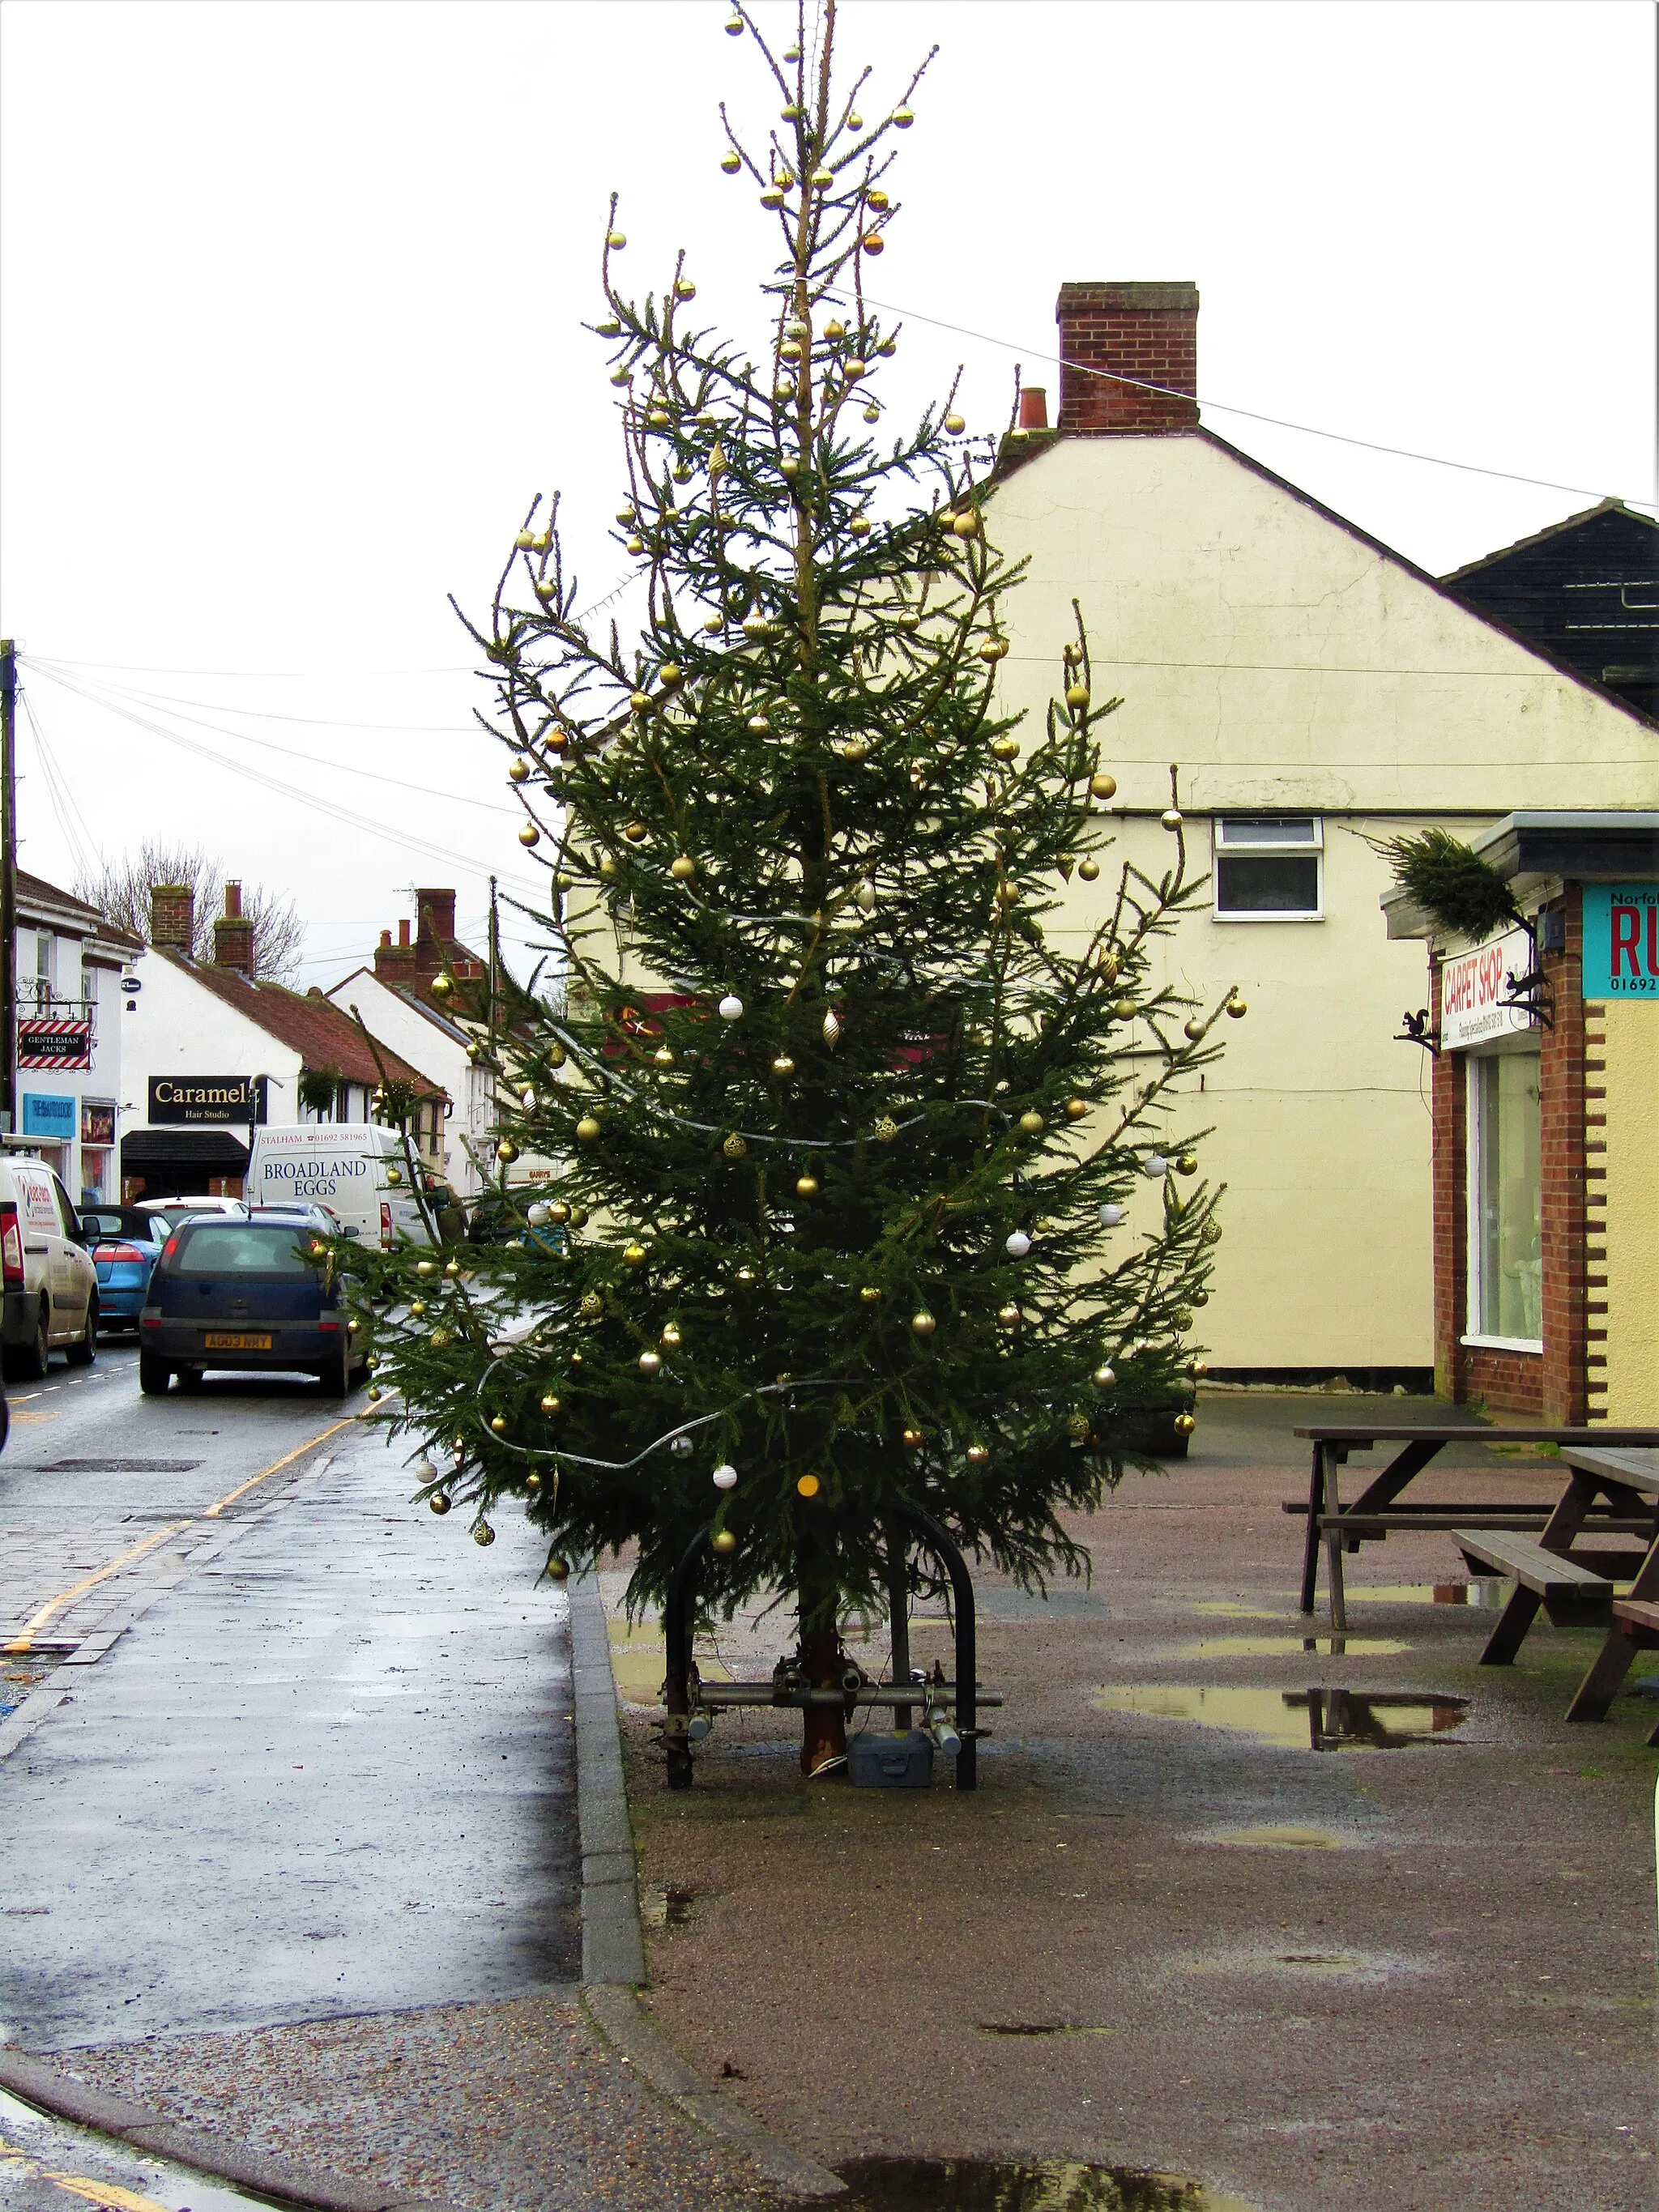 Photo showing: The town Christmas tree which is located on the High street in the town of Stalham, Norfolk, England.